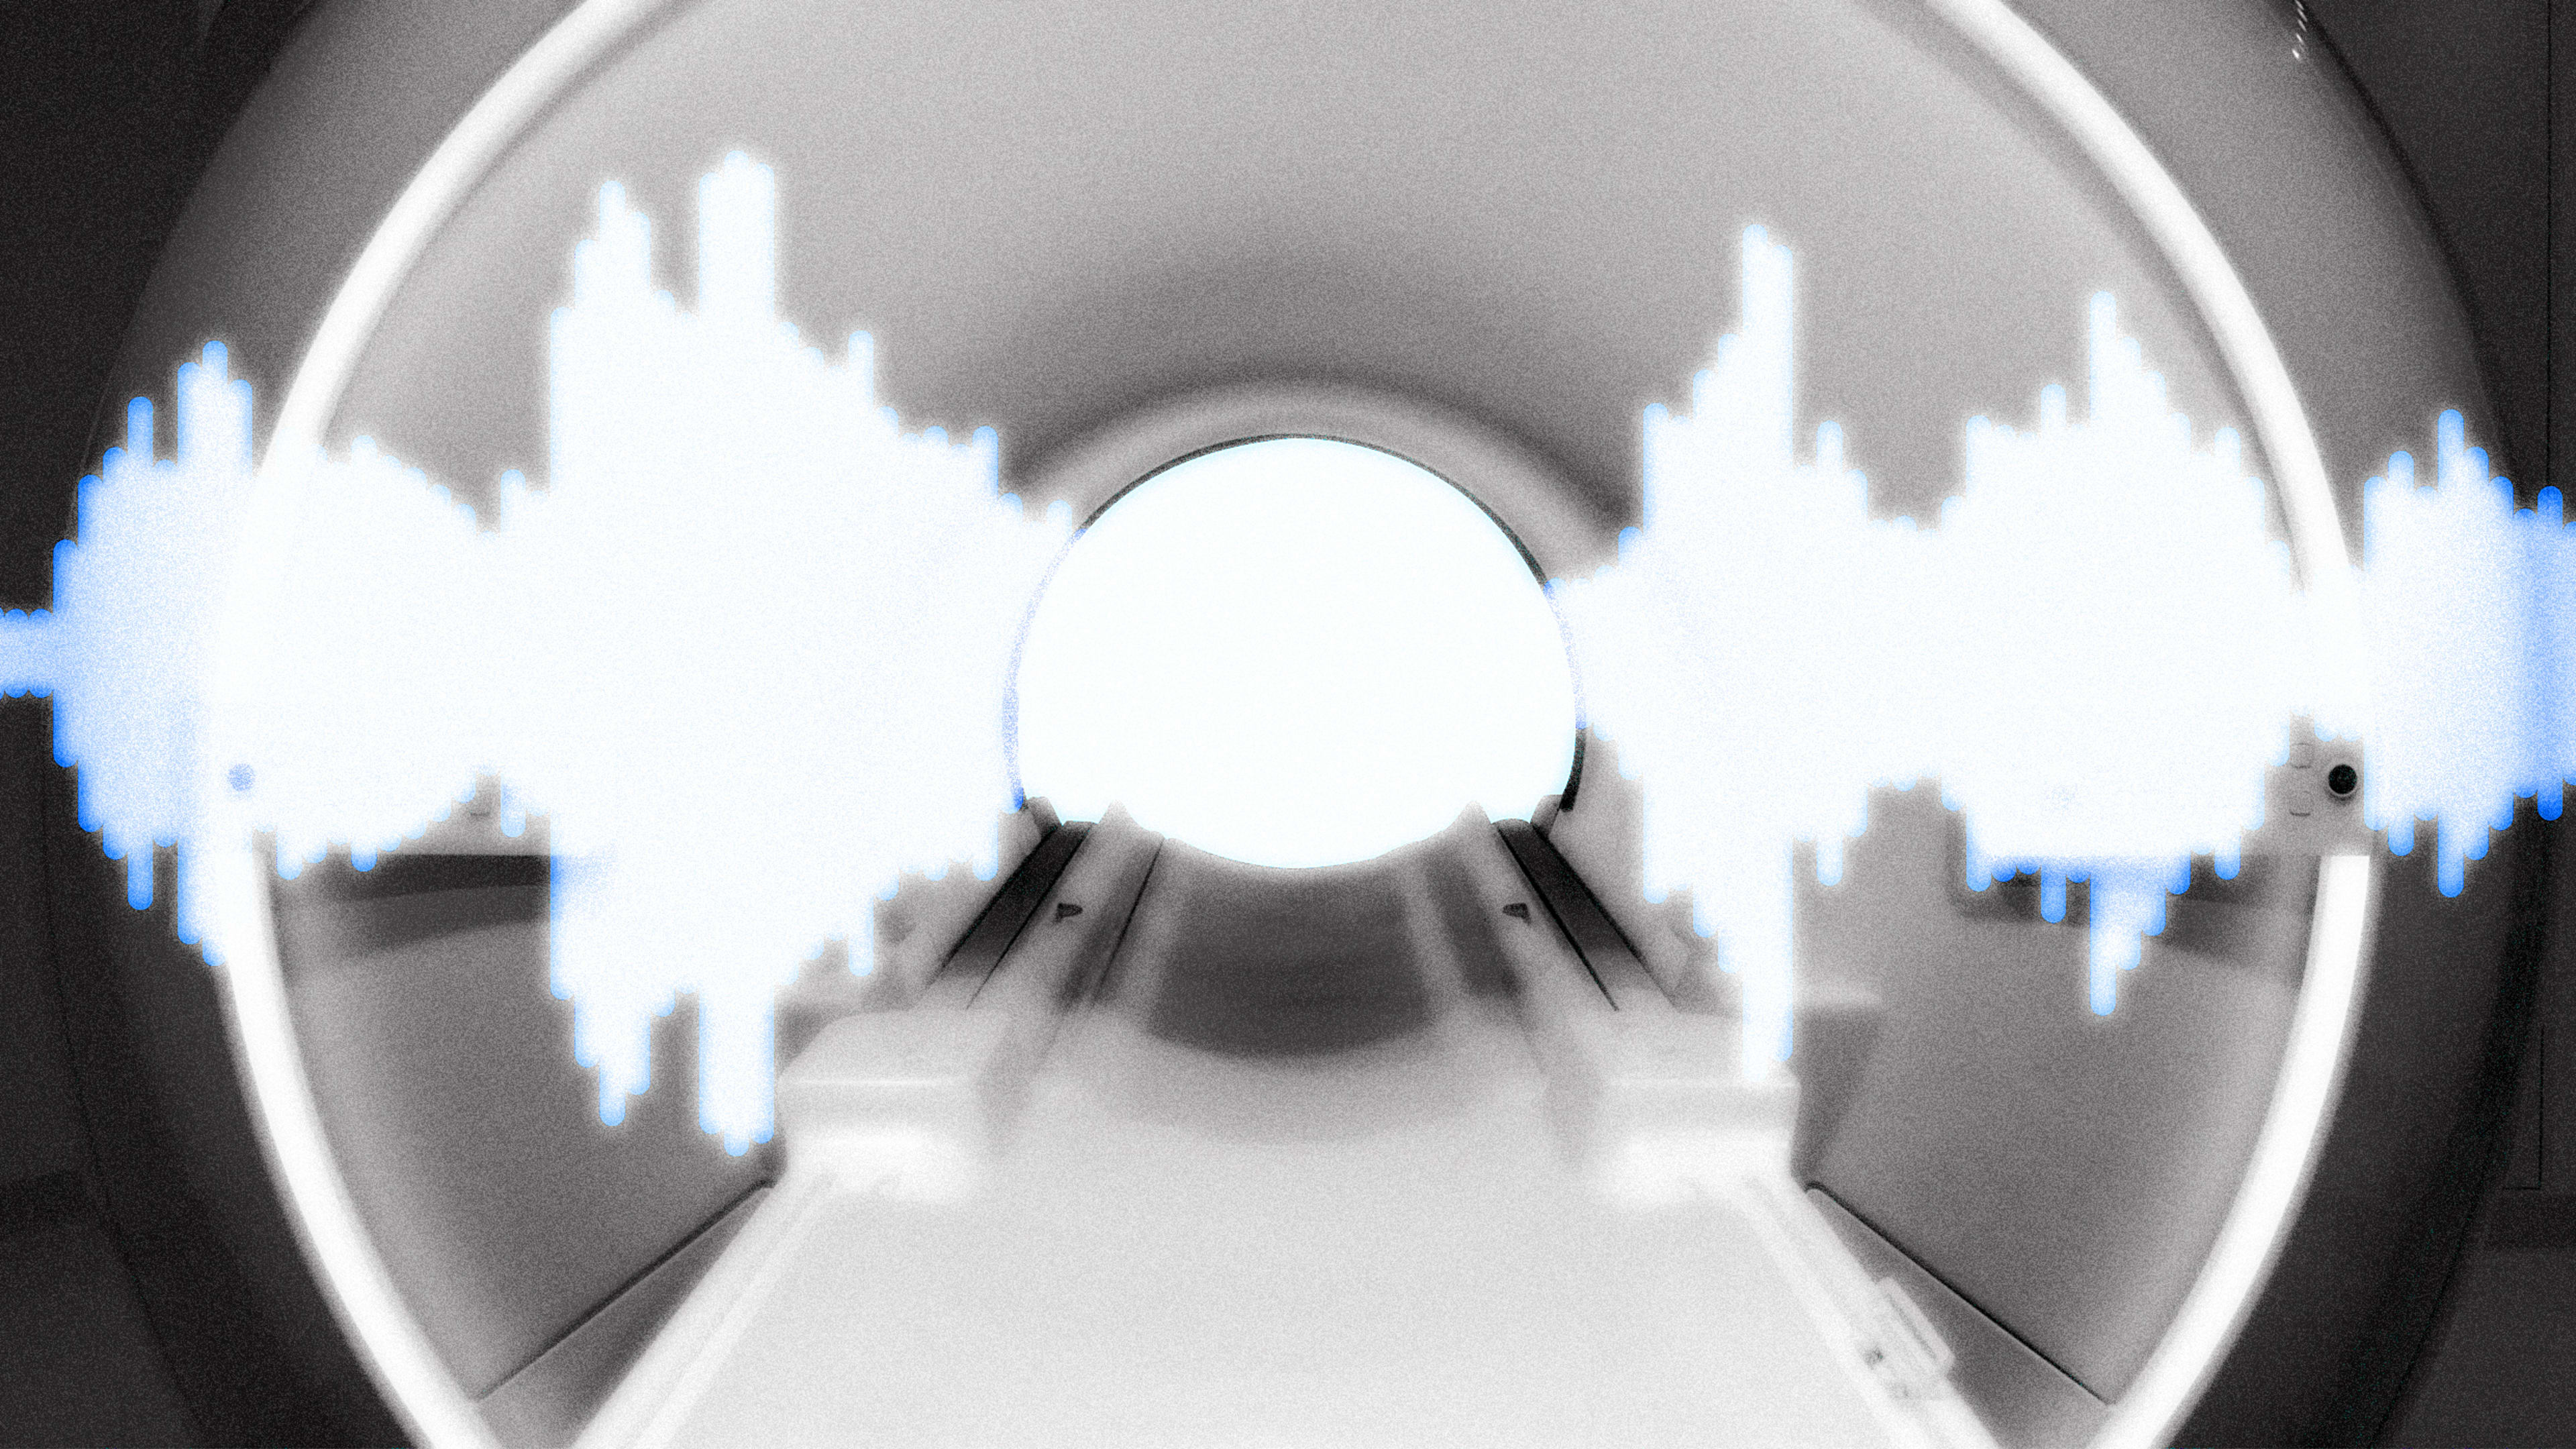 Prenuvo is bringing AI music to MRIs. Can it cure your claustrophobia?